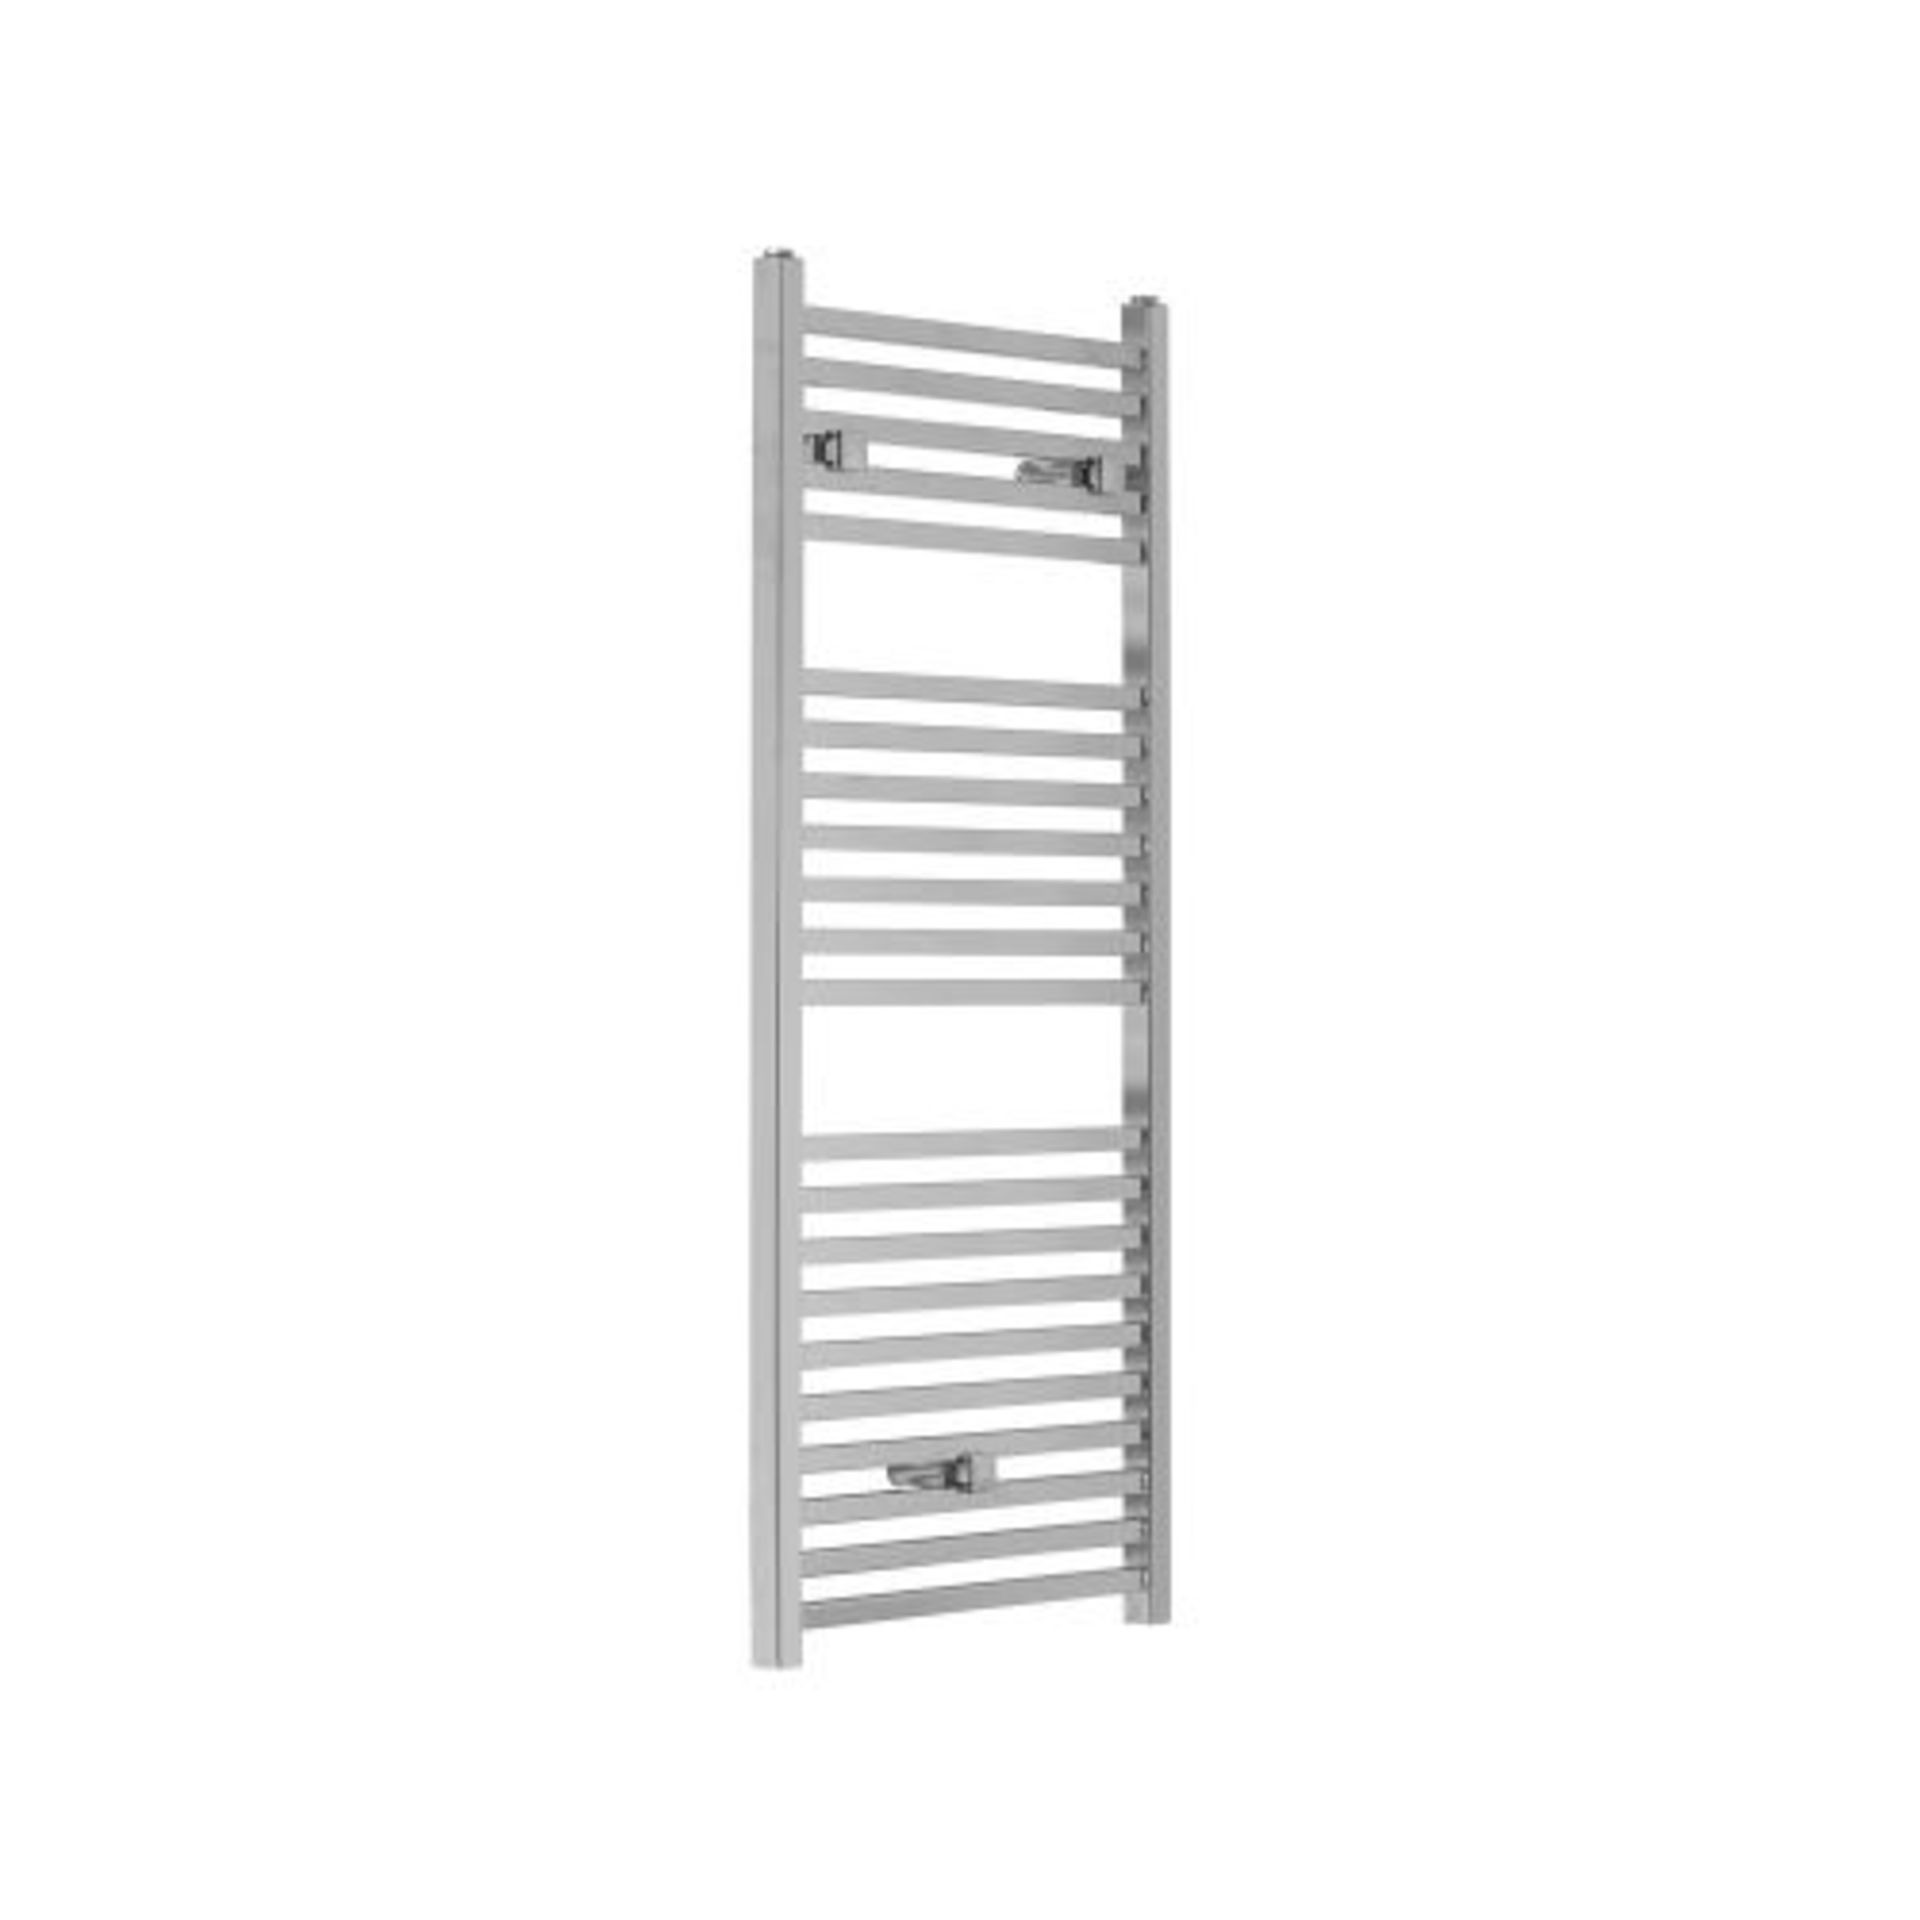 New (G46) 1110x500mm Straight Square Ladder Towel.